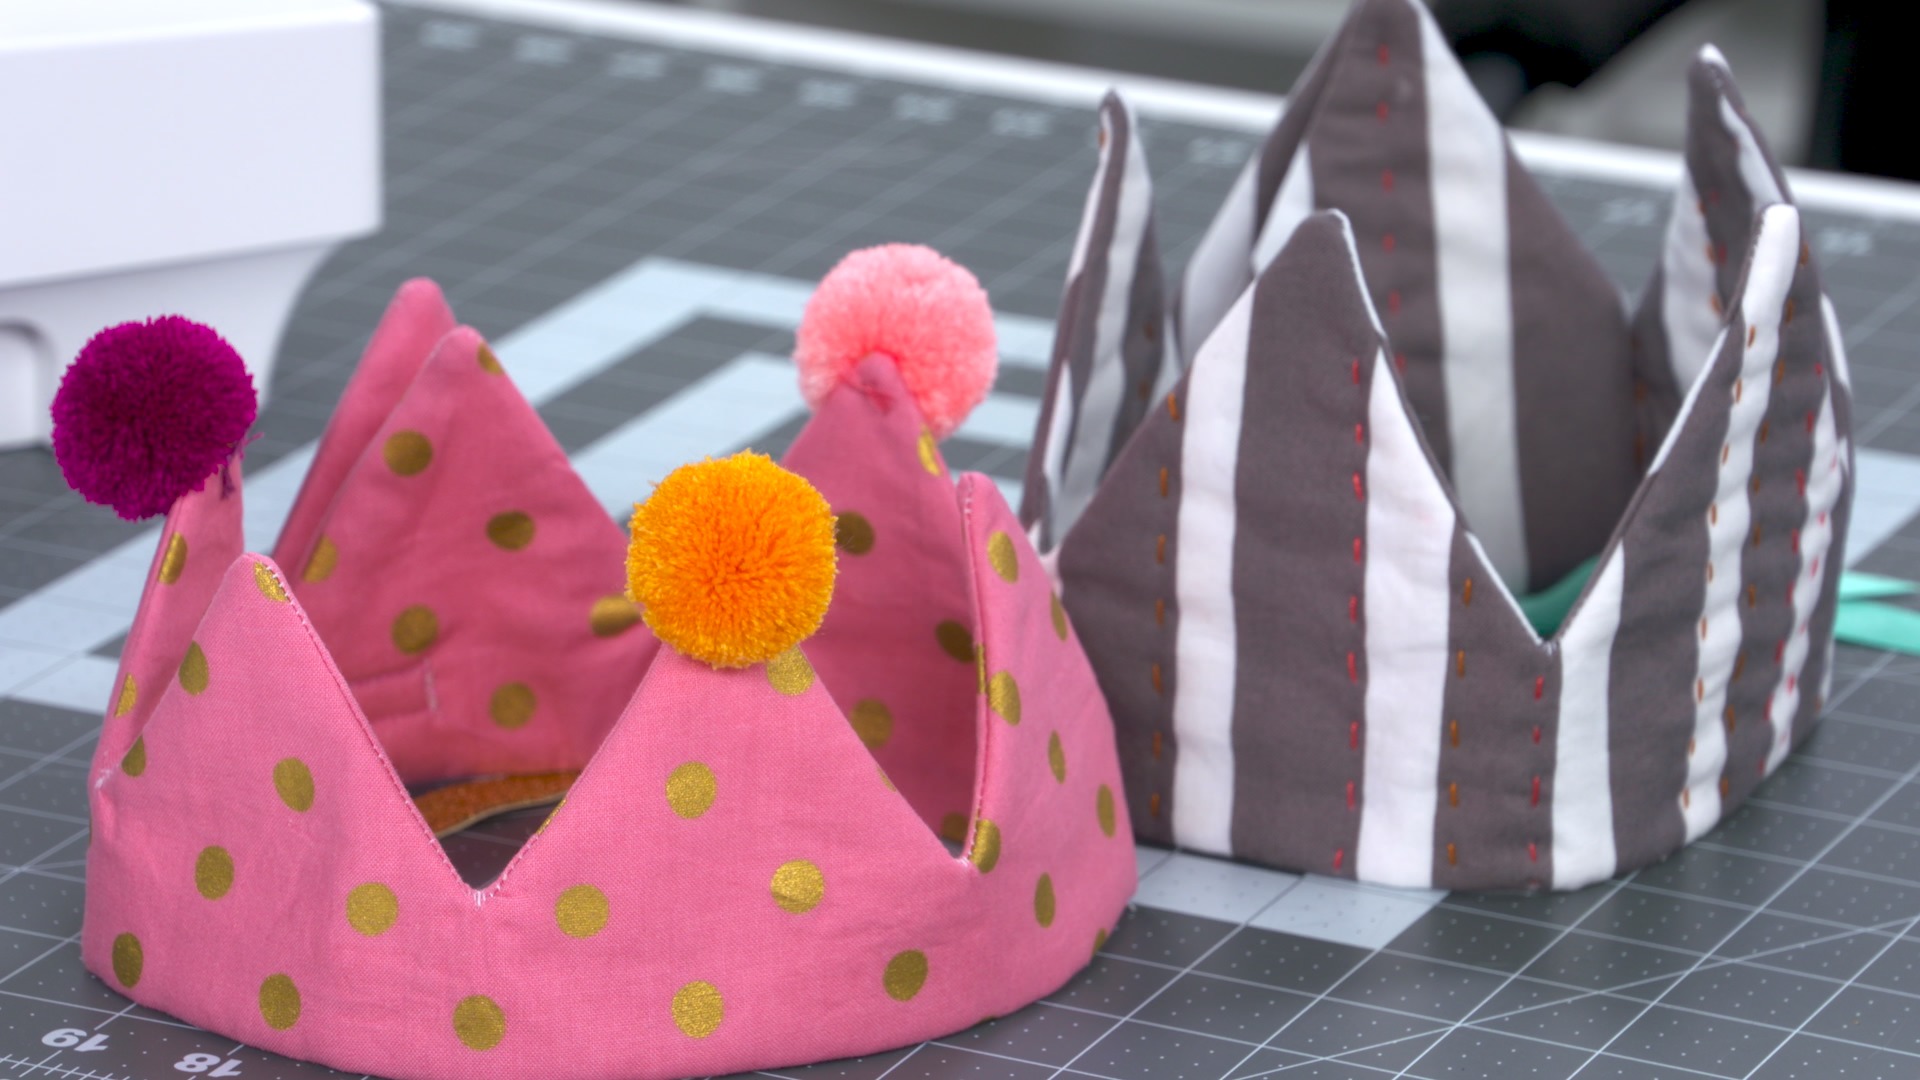 Sewing instructor shows how to sew a pink and striped crown for birthdays and other occasions